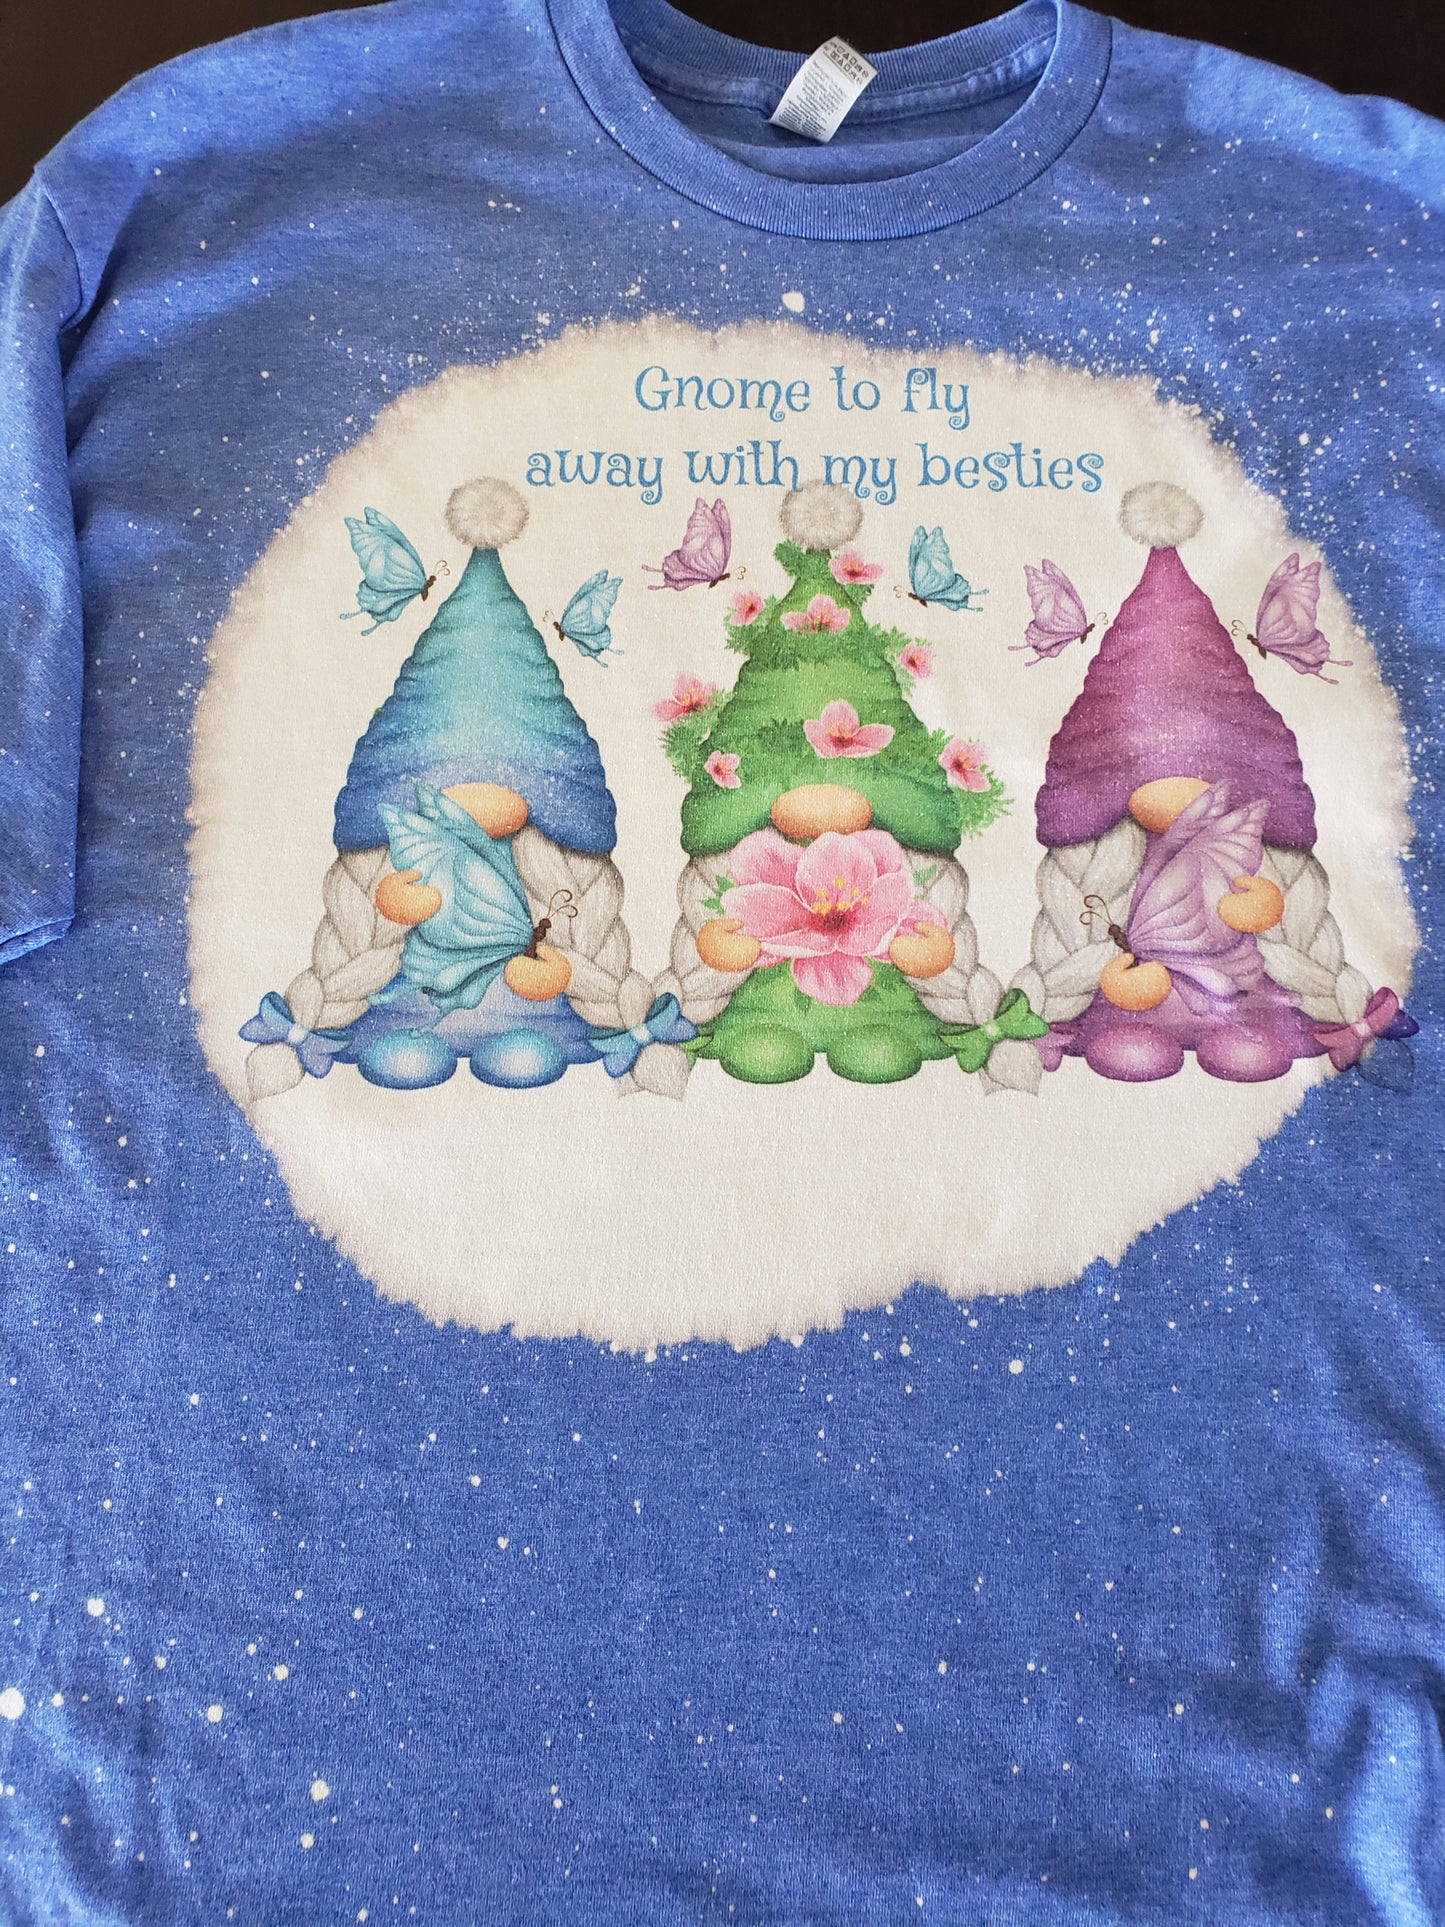 Gnome to fly away with my besties